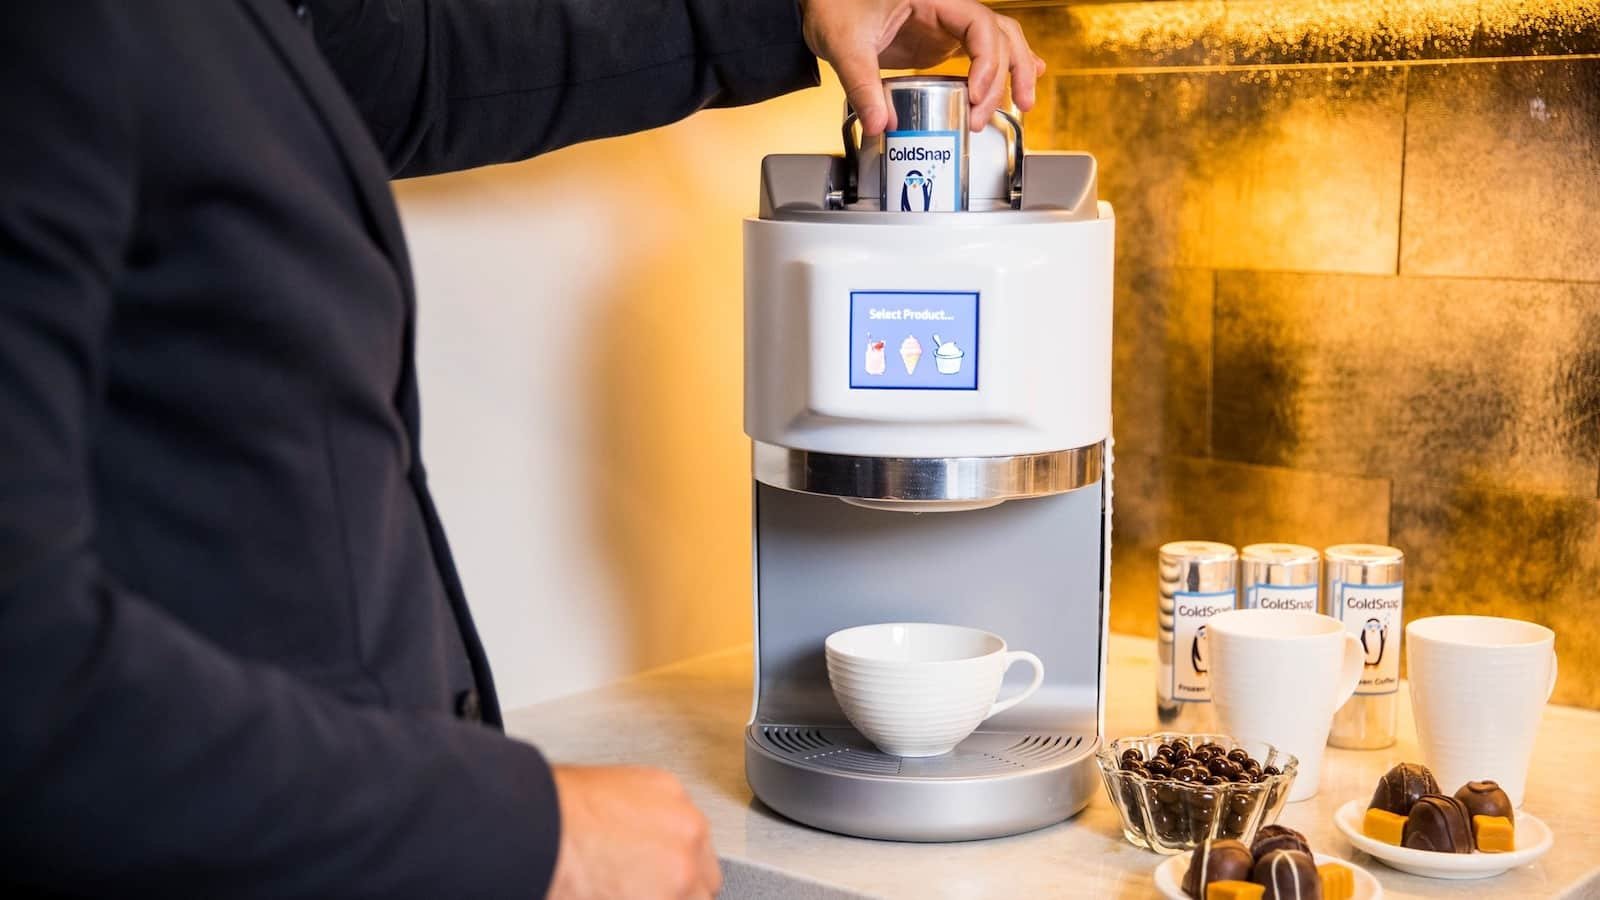 ColdSnap frozen treat machine makes ice-cold food in just four steps